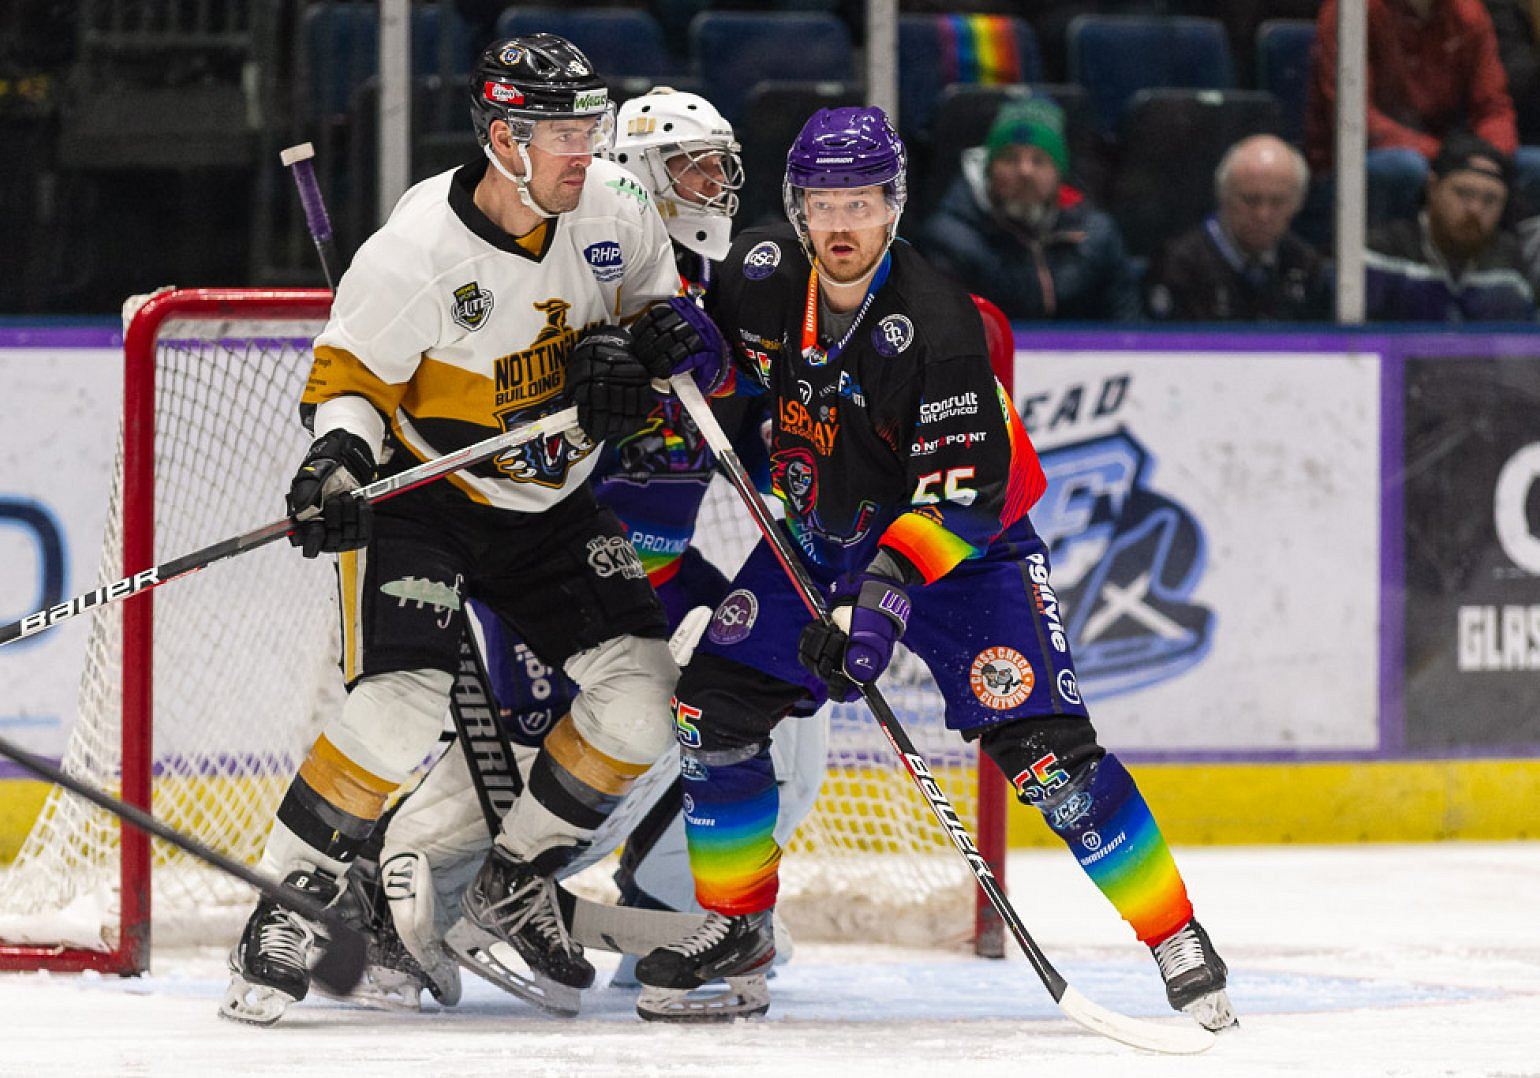 WEBCAST: Watch the Clan in Fife LIVE